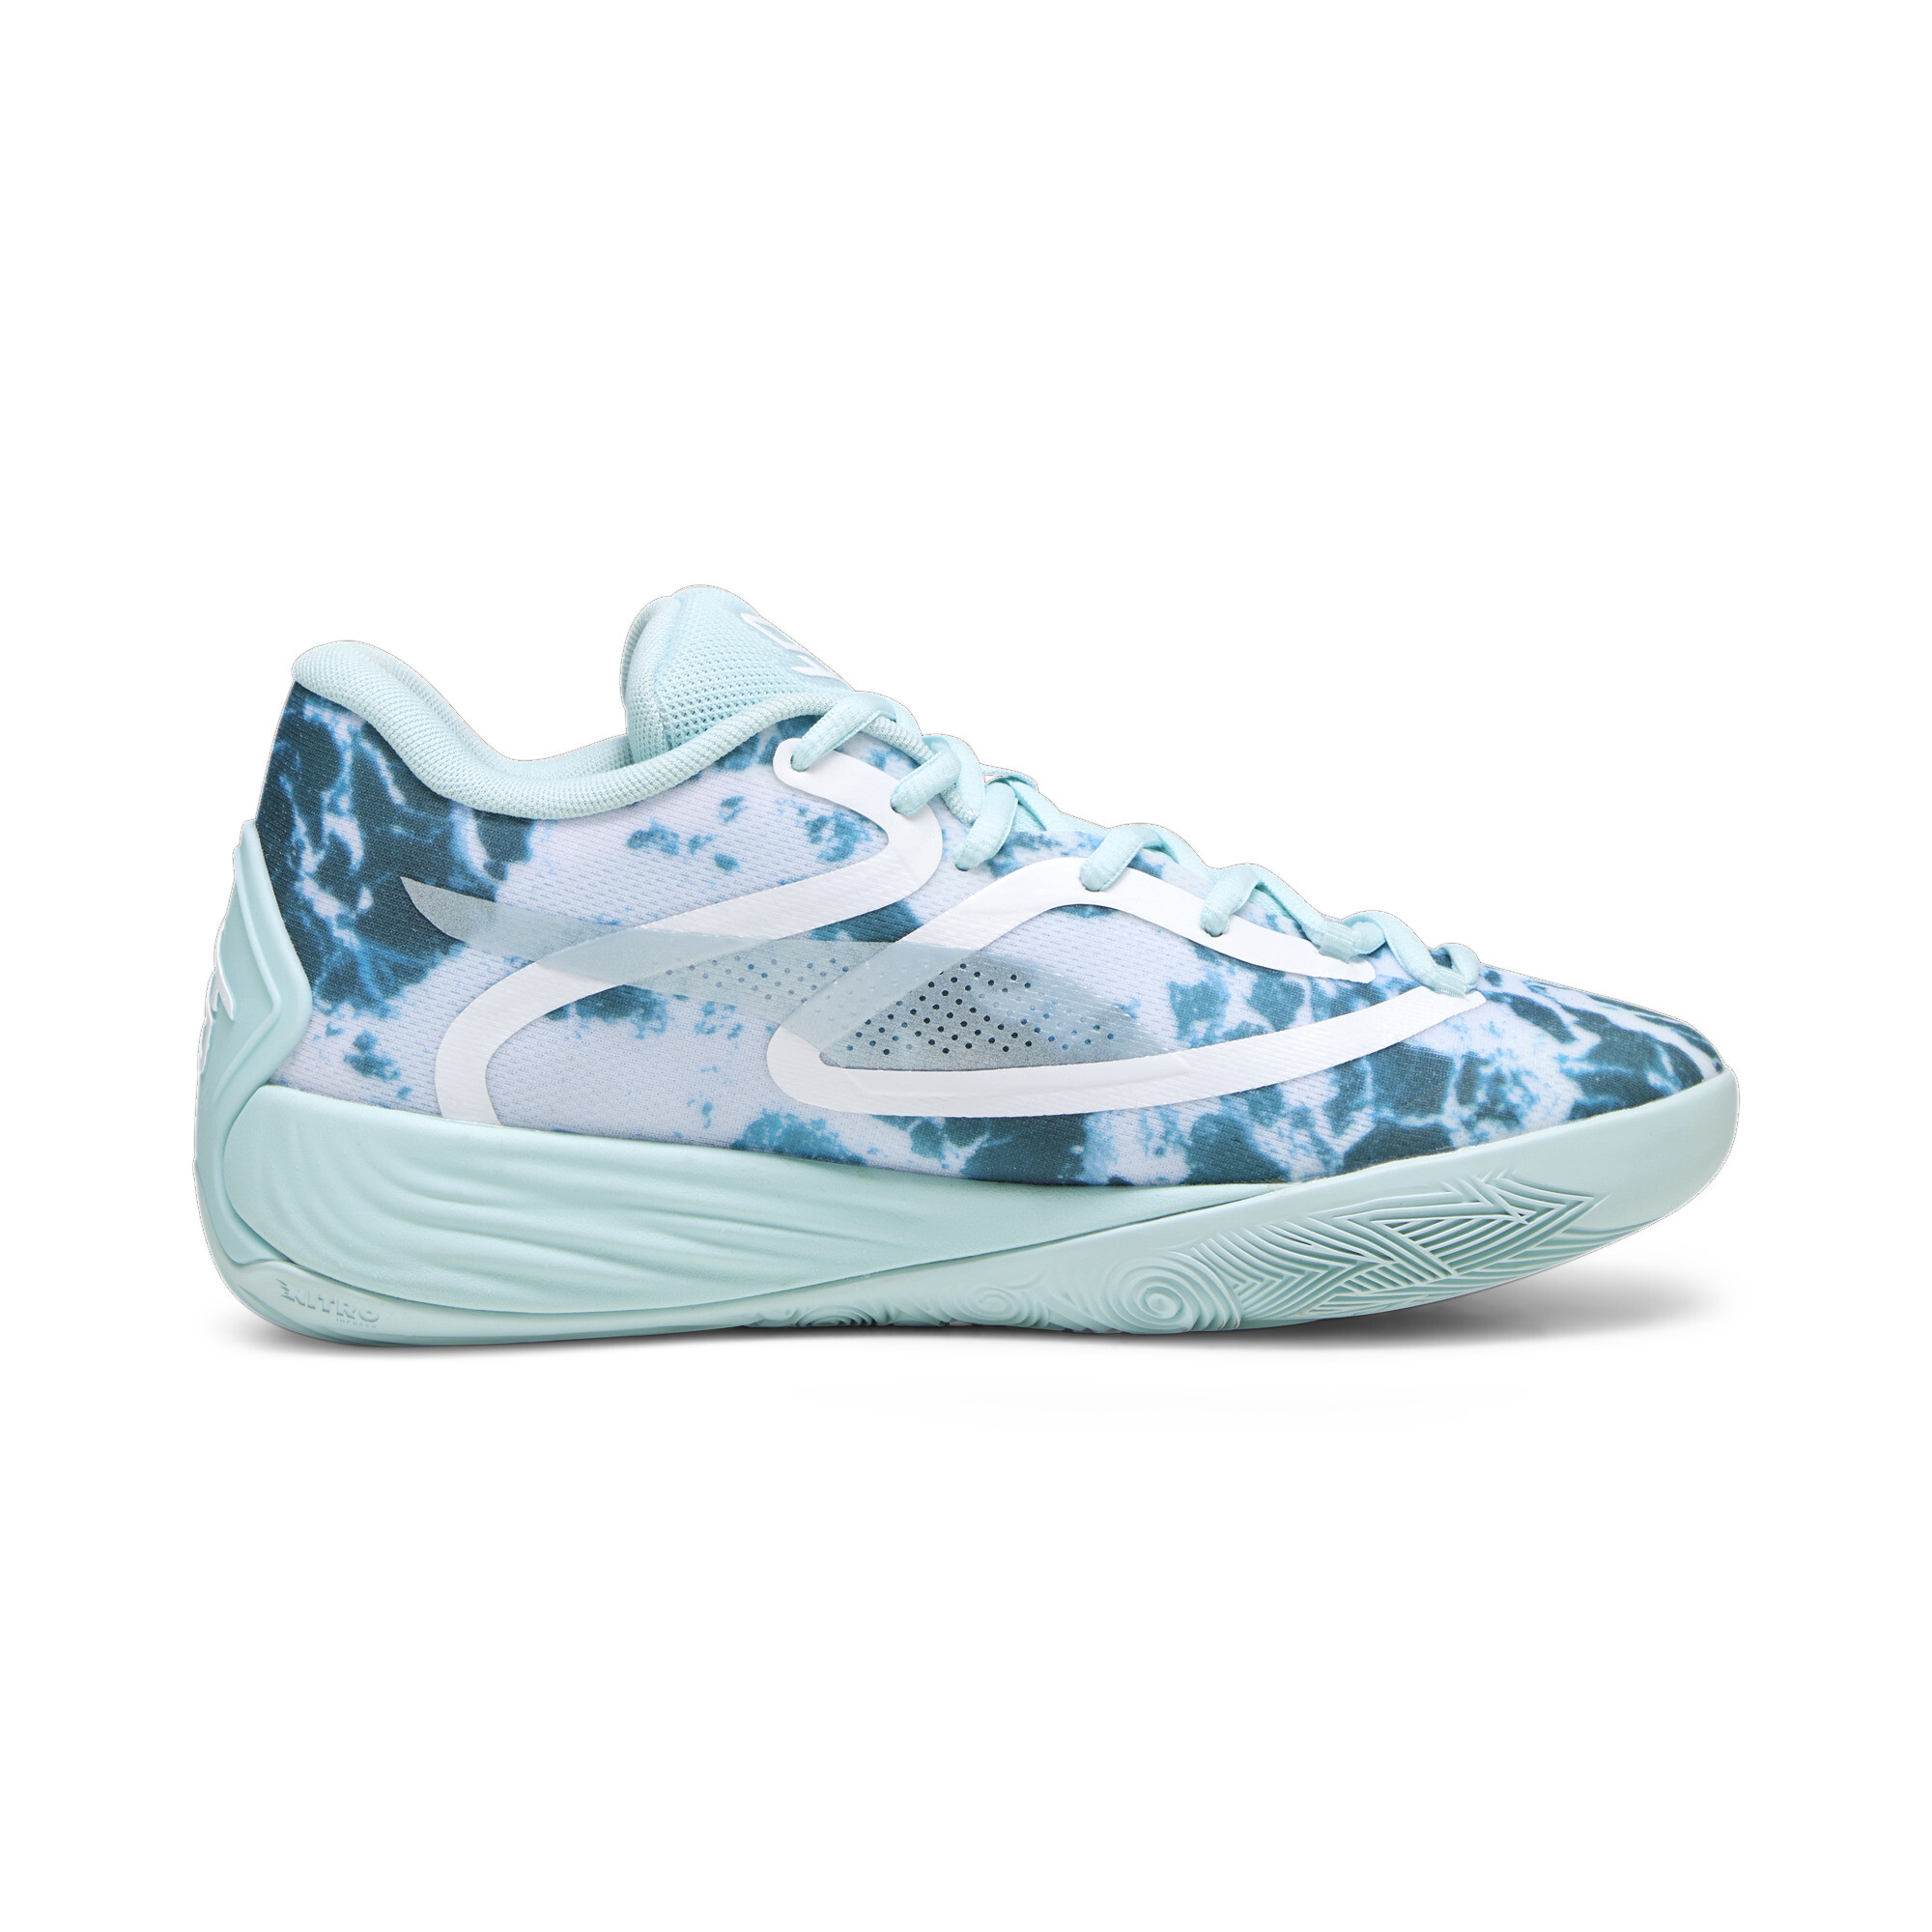 Women's Puma Stewie 2 Water's Basketball Shoes, Blue, Size 40, Shoes